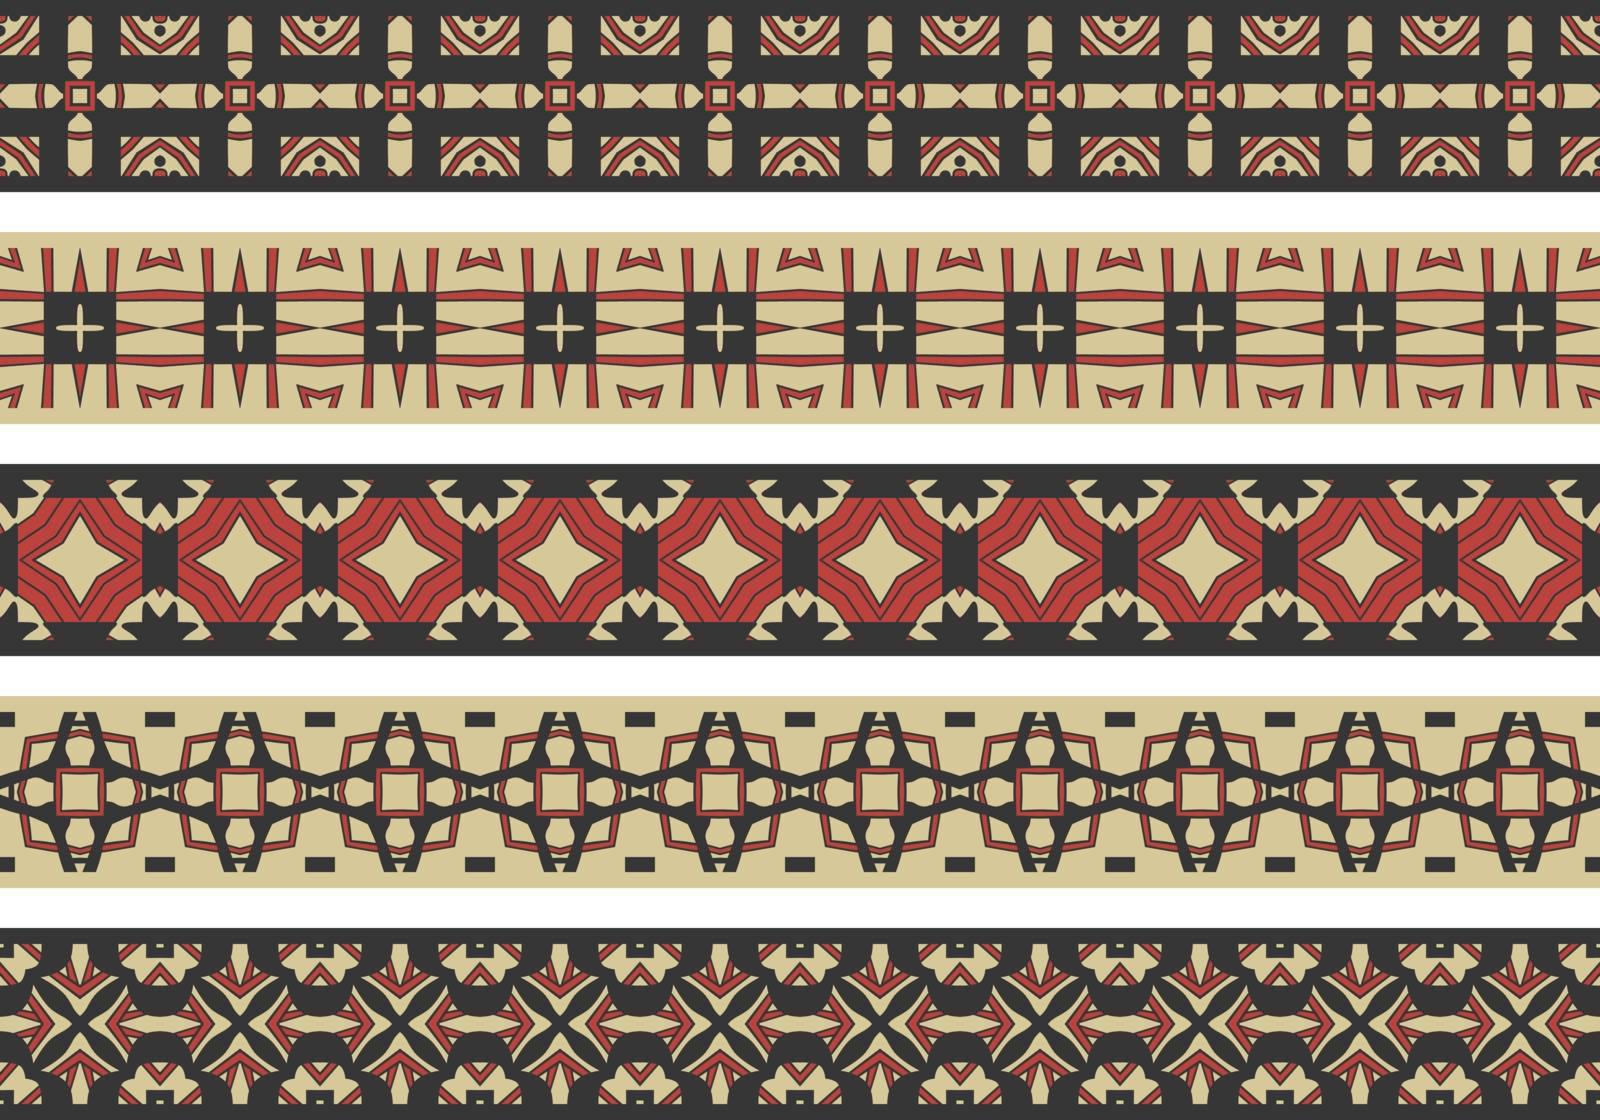 Seamless decorative borders by nahhan